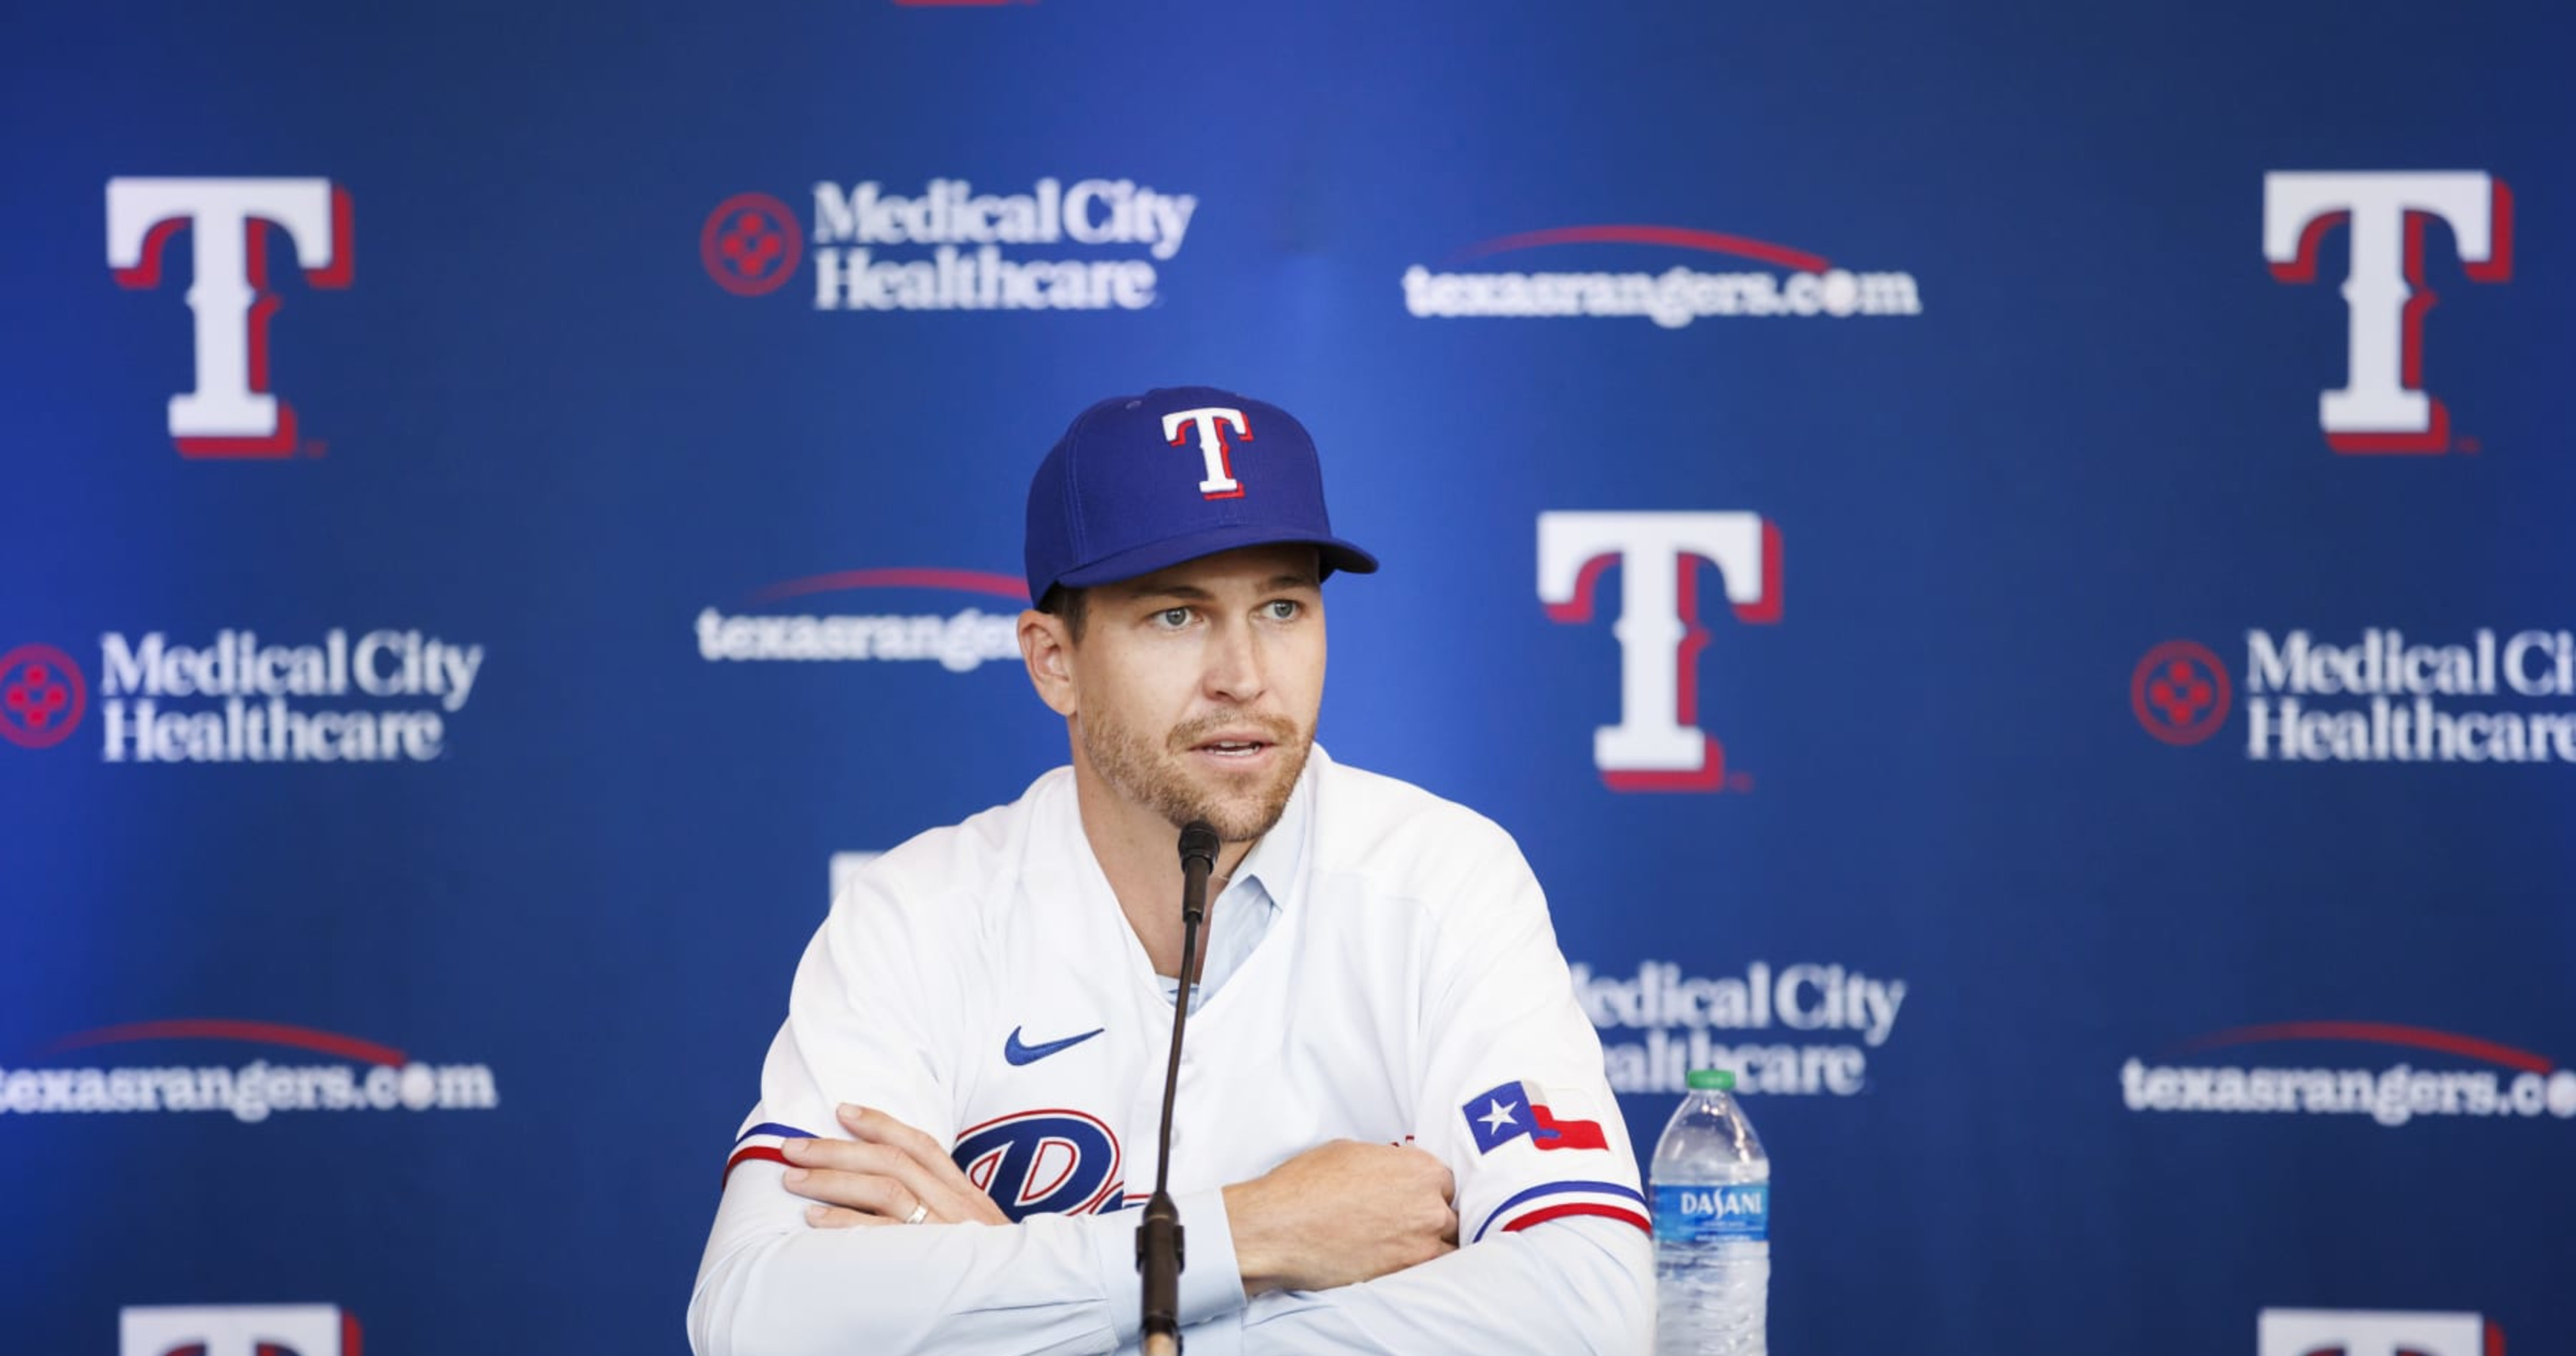 Opinion: The Good, Bad, and Ugly Parts of Texas Rangers History